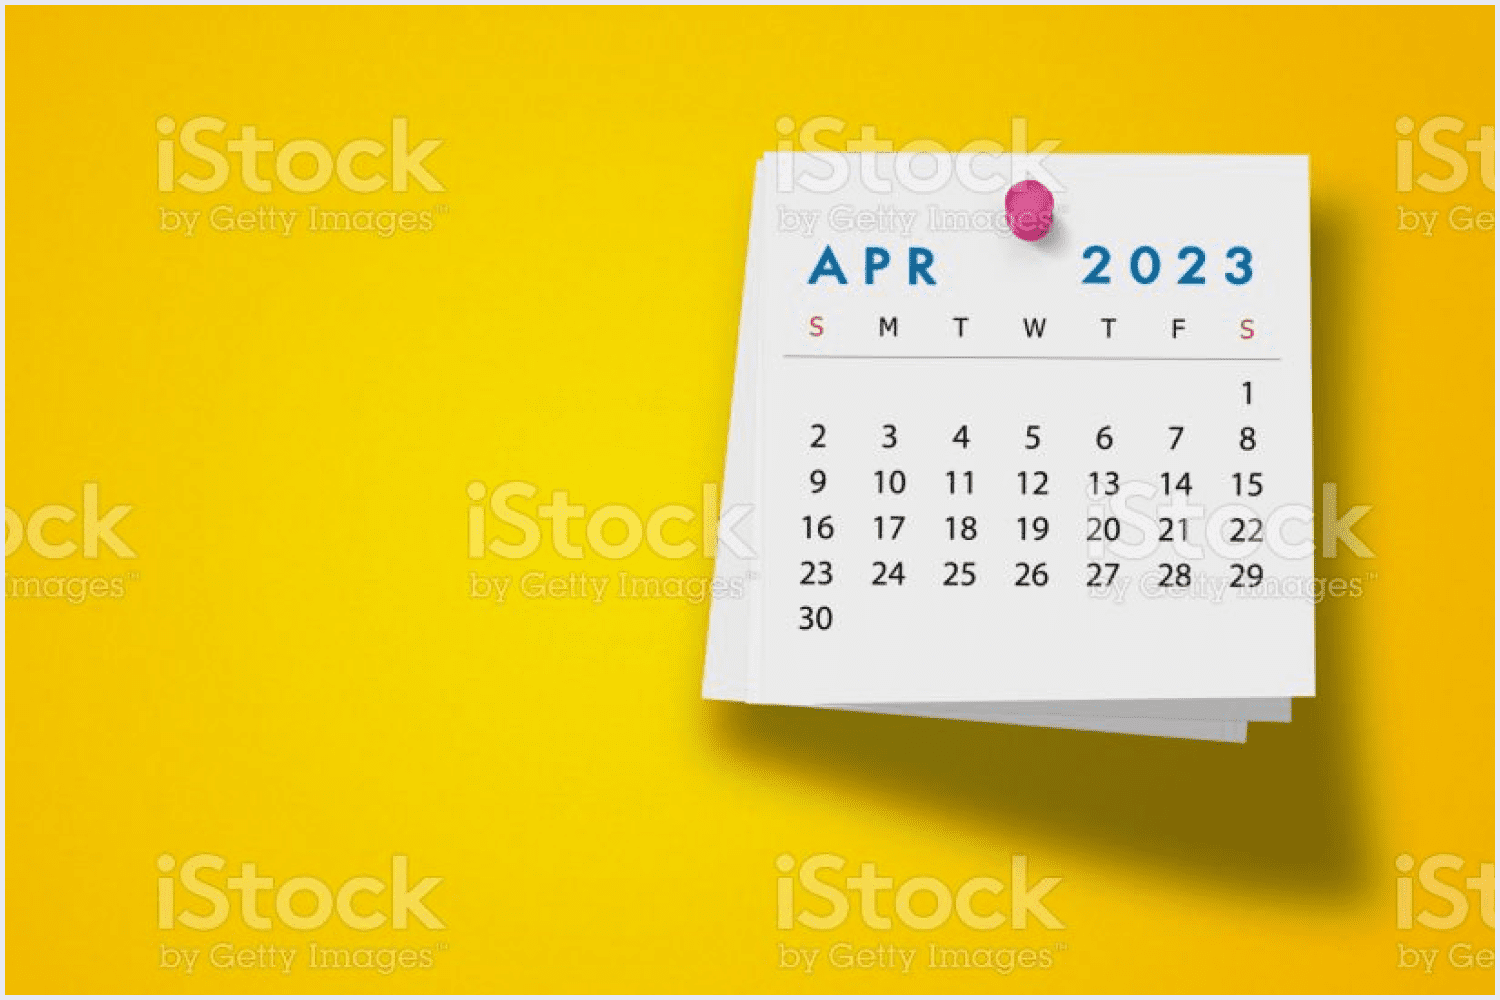 Calendar with a simple yet eye-catching design on a notepad against yellow wallpaper.